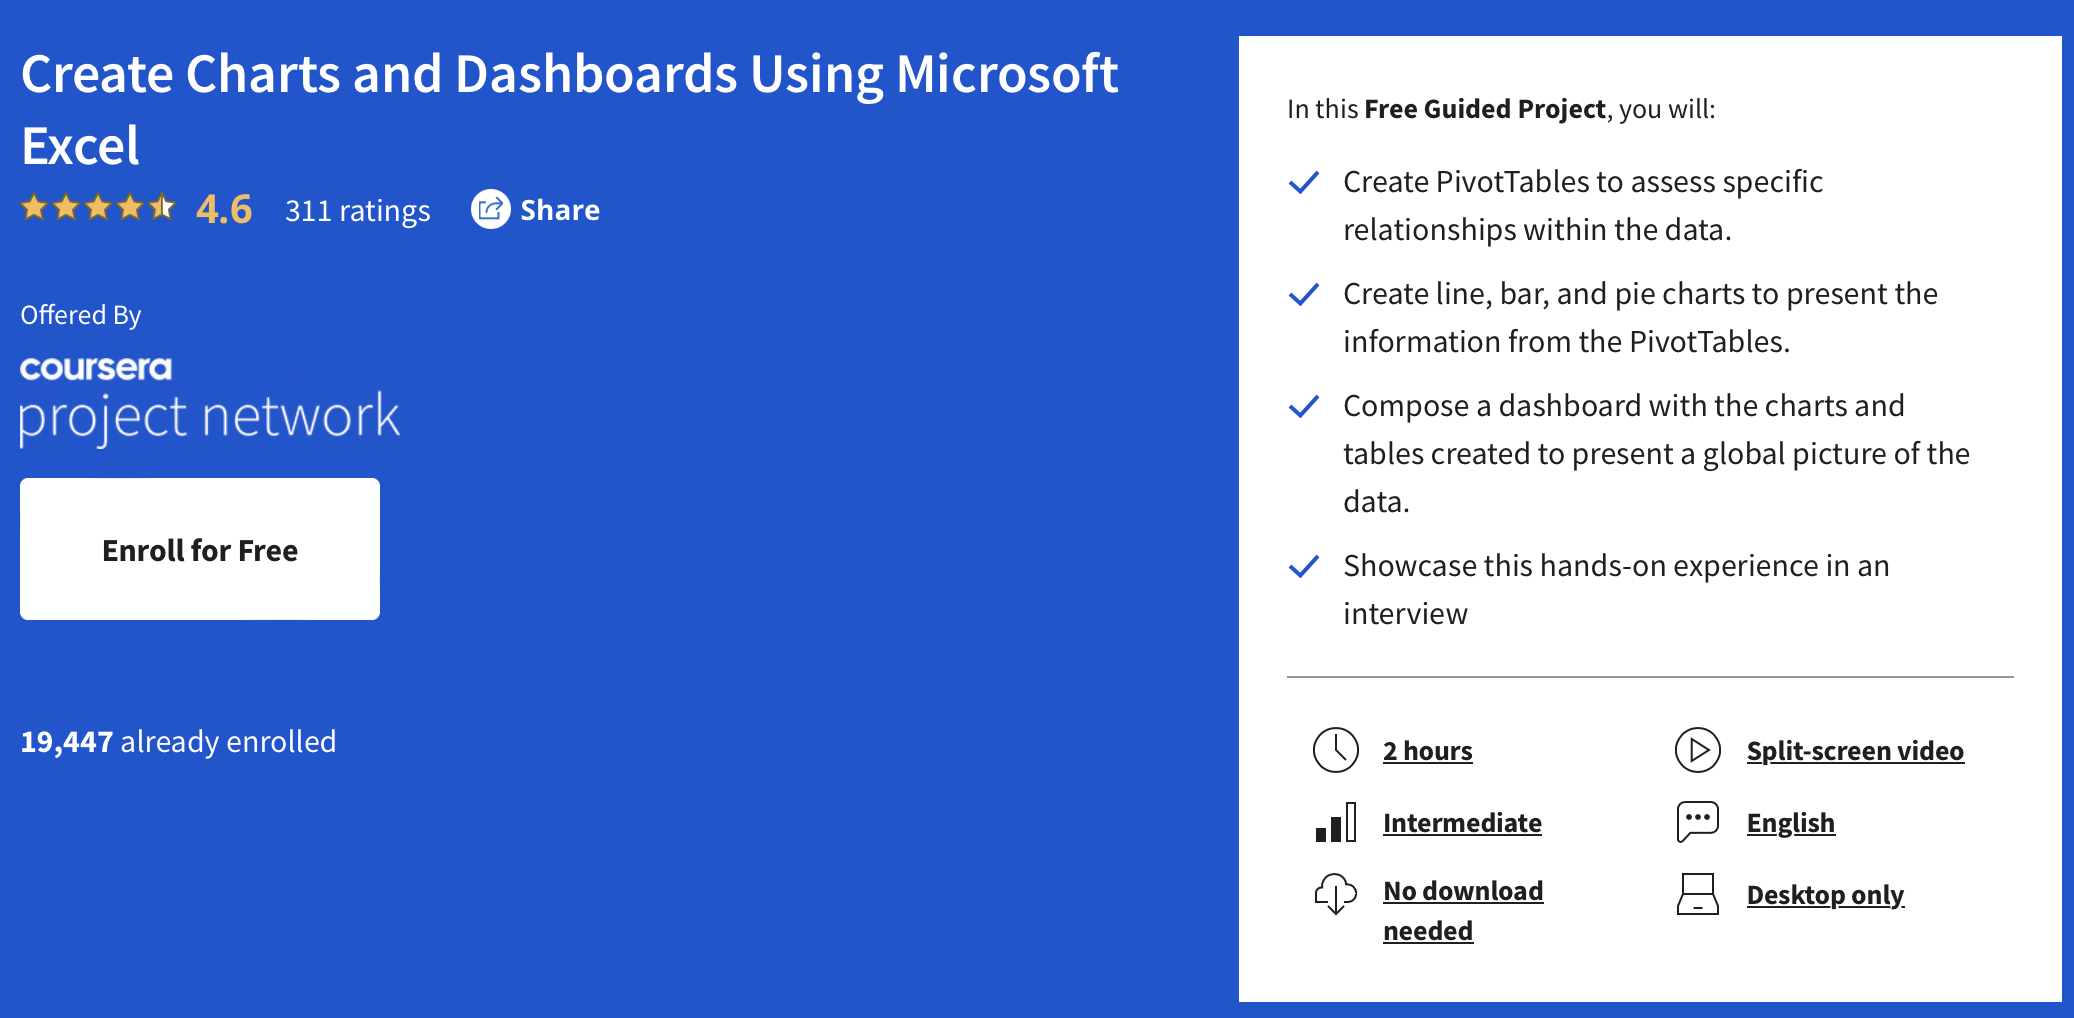 Create Charts and Dashboards Using Microsoft Excel